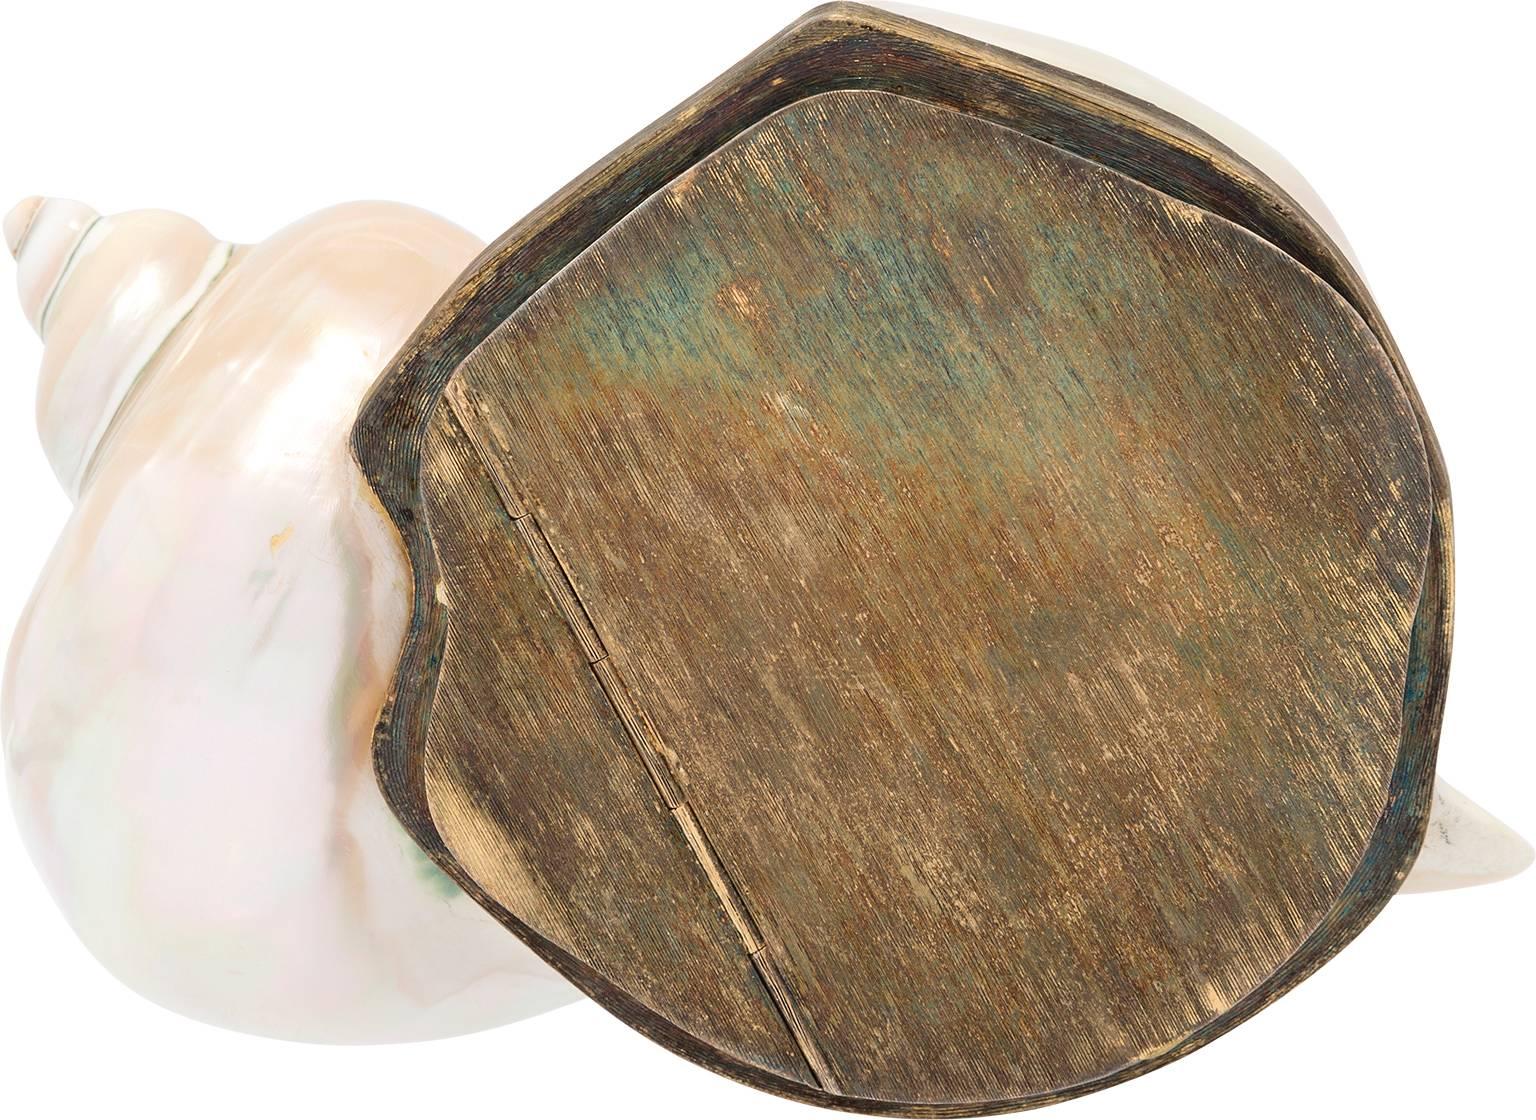 Judith Leiber Natural Sundial Shell Minaudiere Bag In Good Condition For Sale In New York, NY